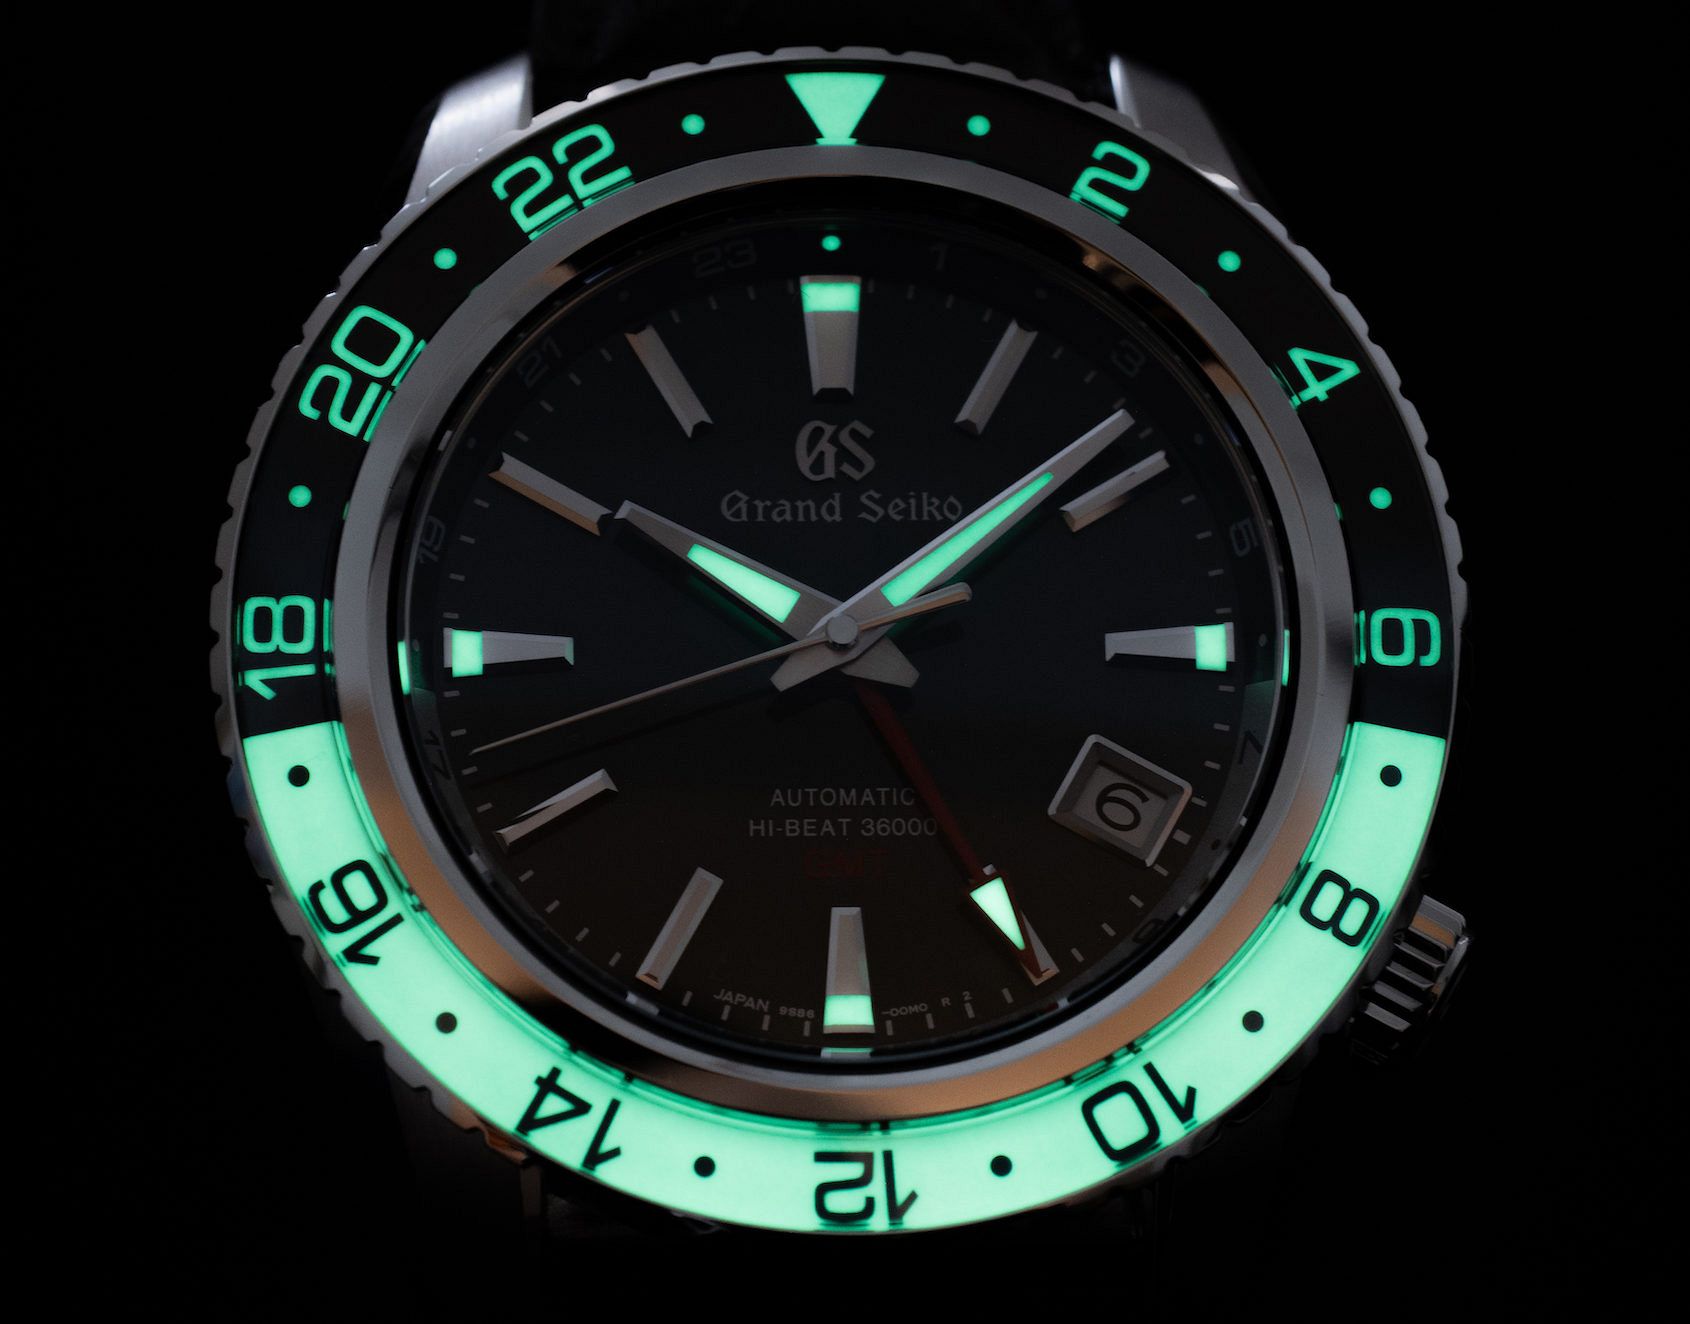 HANDS-ON: The Grand Seiko SBGJ237 and SBGJ239, two terrific GMTs with lovely lume